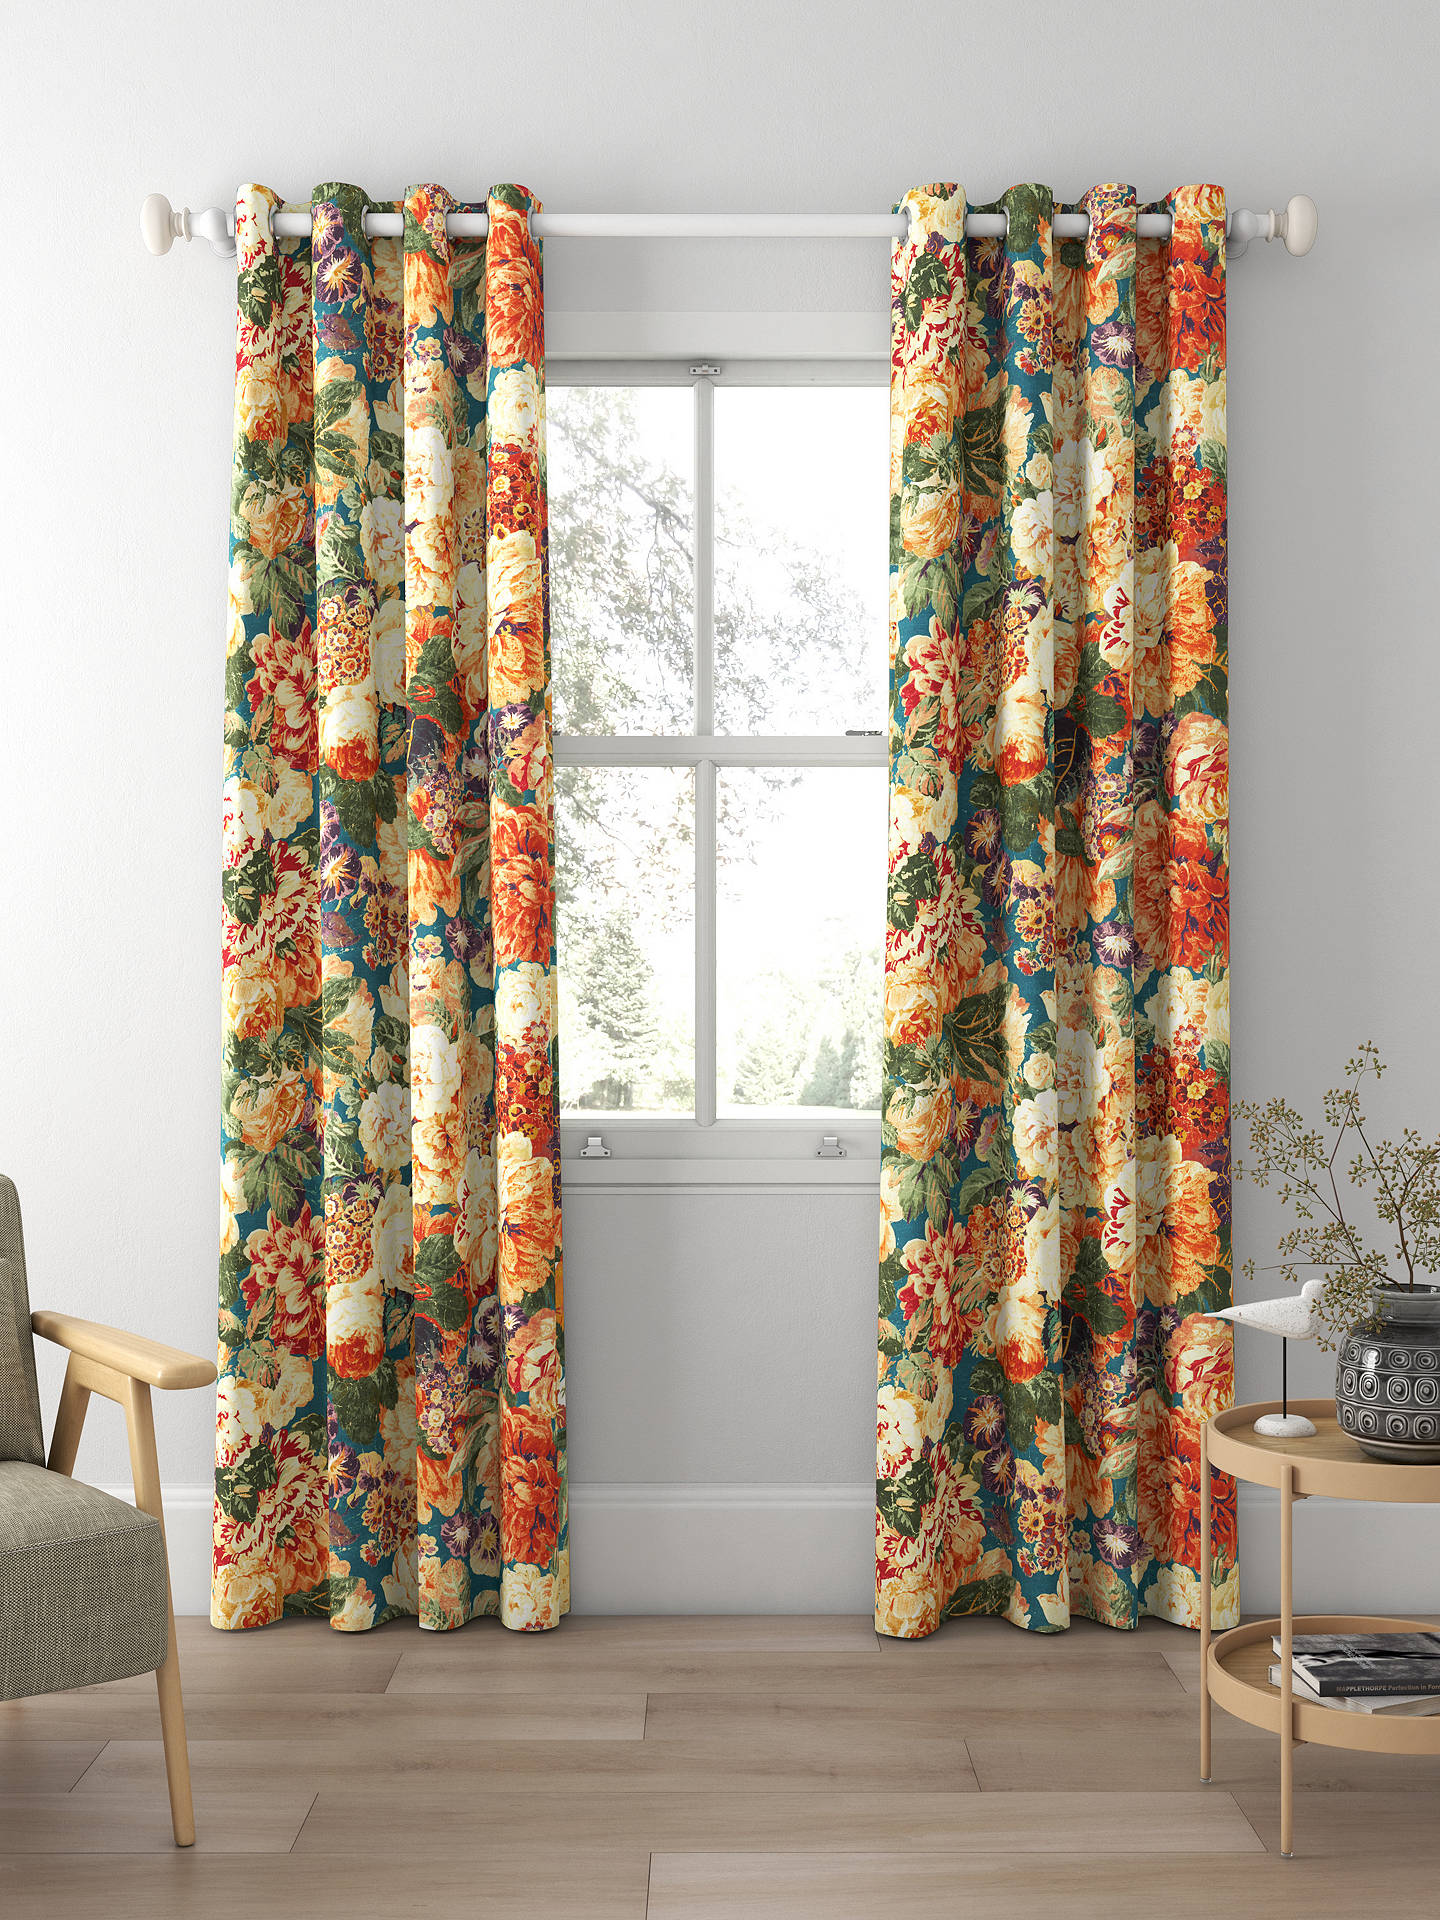 Sanderson Very Rose and Peony Made to Measure Curtains, Kingfisher/Red Berry